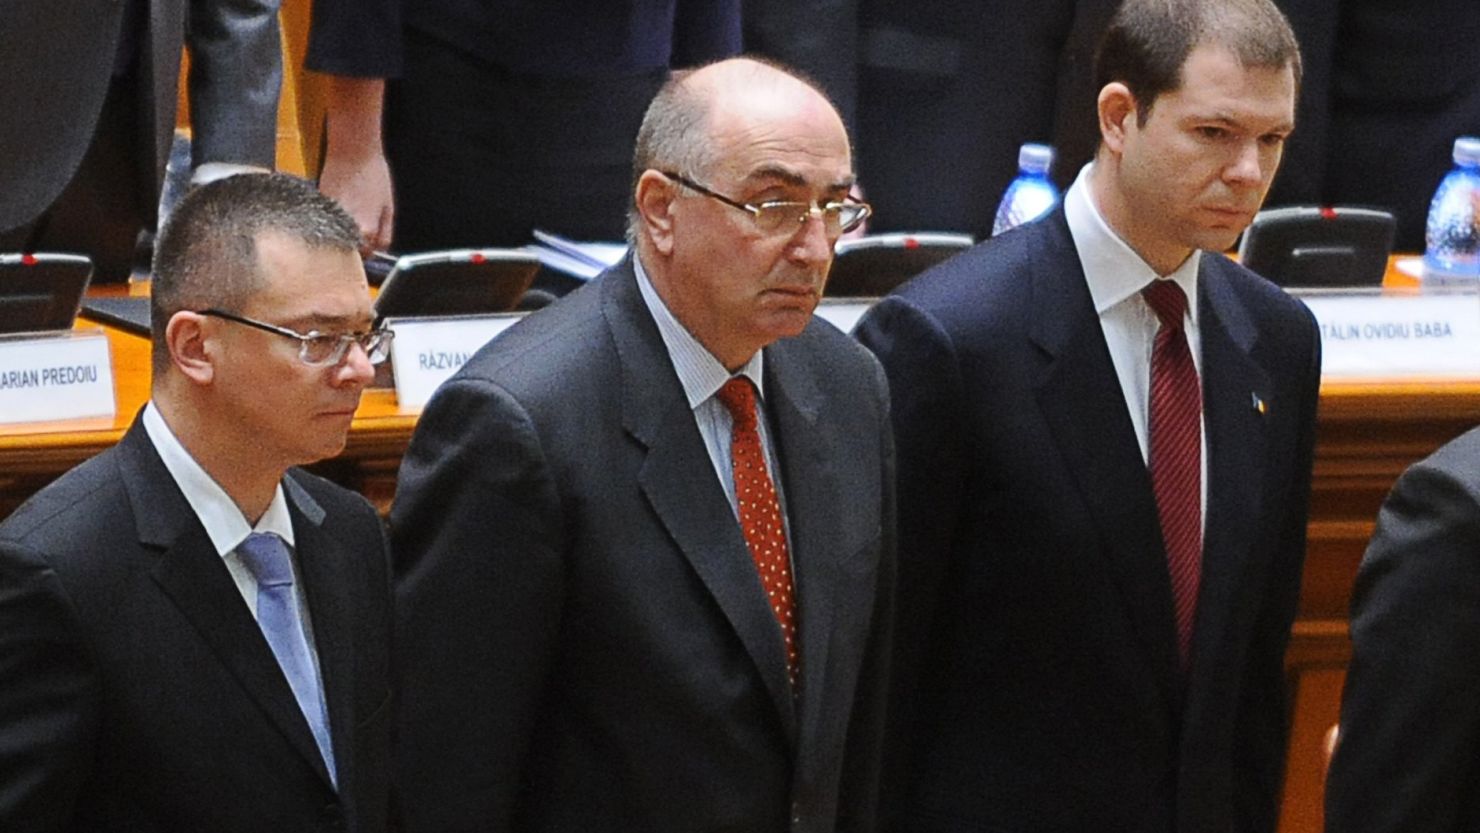 Outgoing Prime Minister Mihai Razvan Ungureanu, left, and members of his government in Parliament on Wednesday.